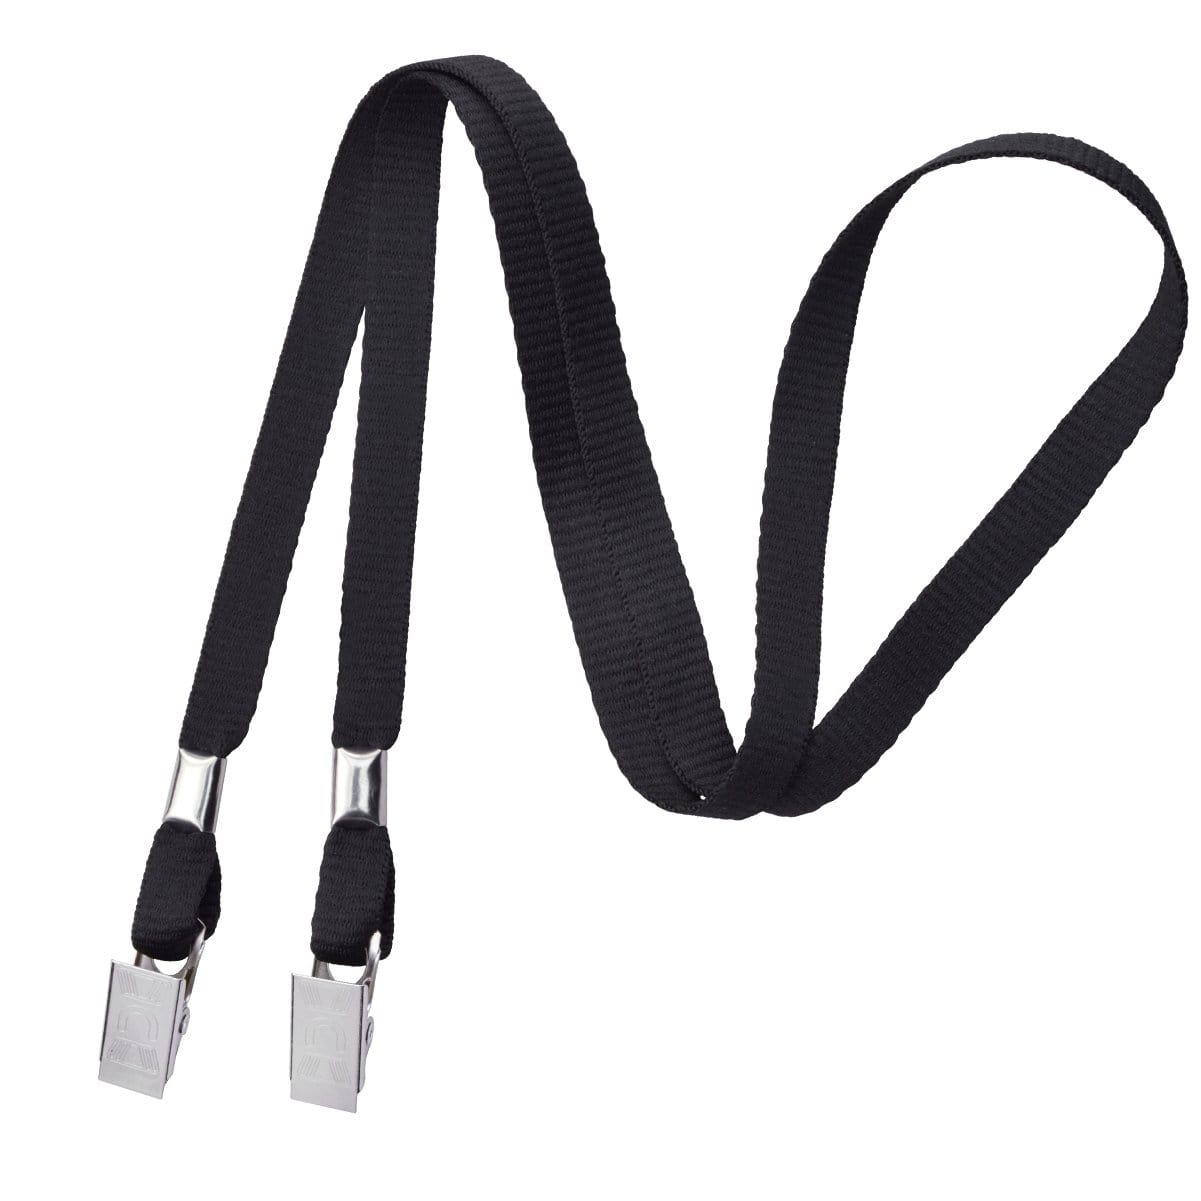 Black Double Clip Lanyard - Lightweight Neck Hanger with 2 Bulldog Clips -  Soft Material (2140-530X) 2140-5301